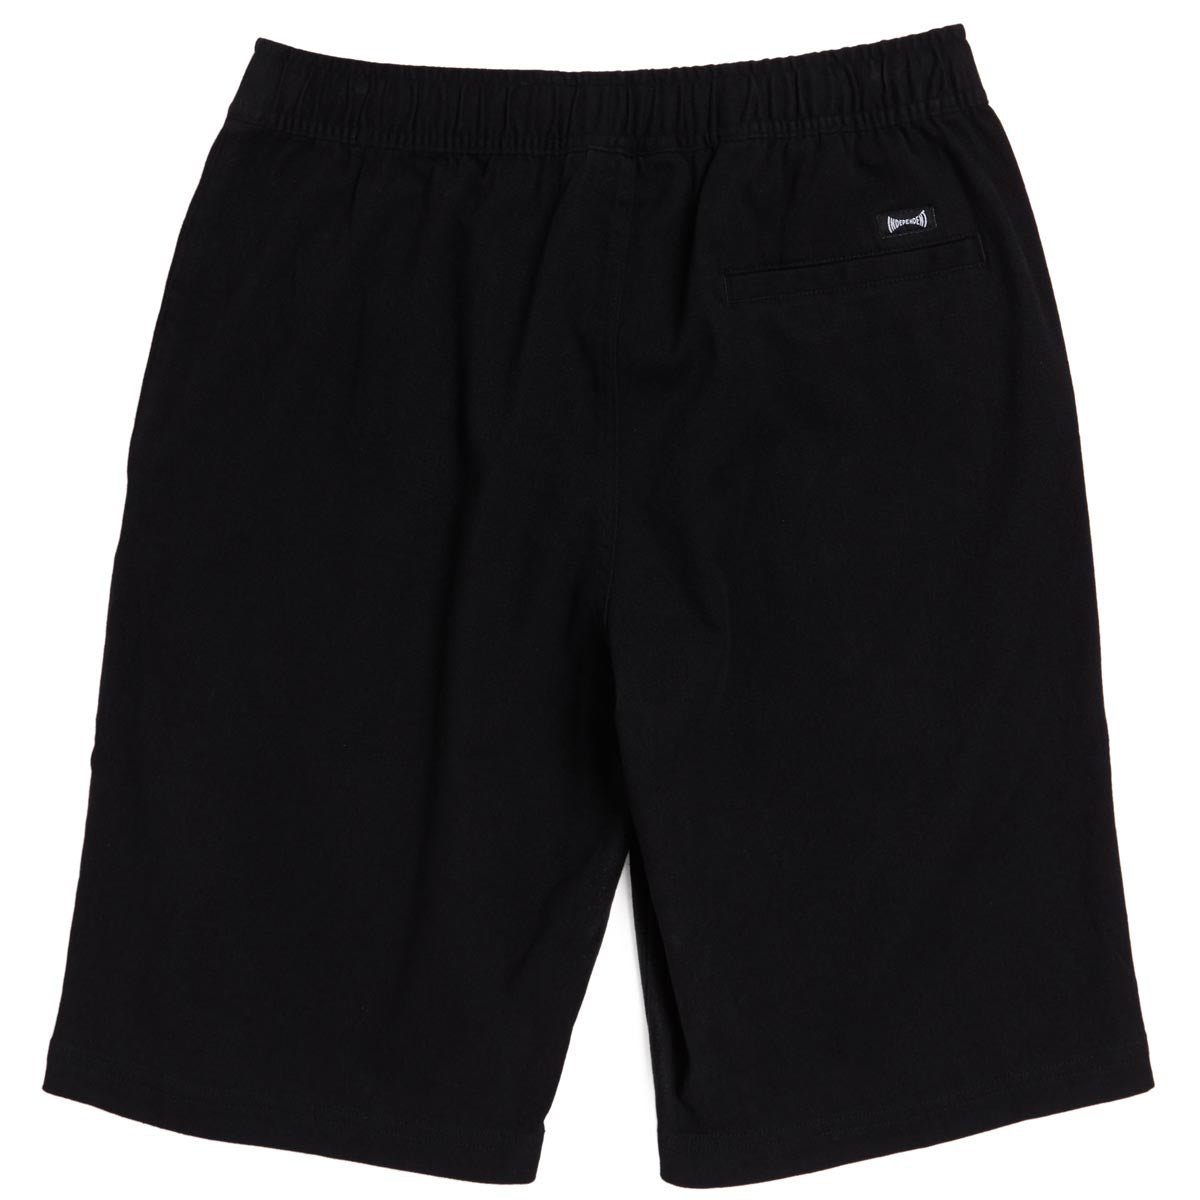 Independent Span Pull On Shorts - Black image 5